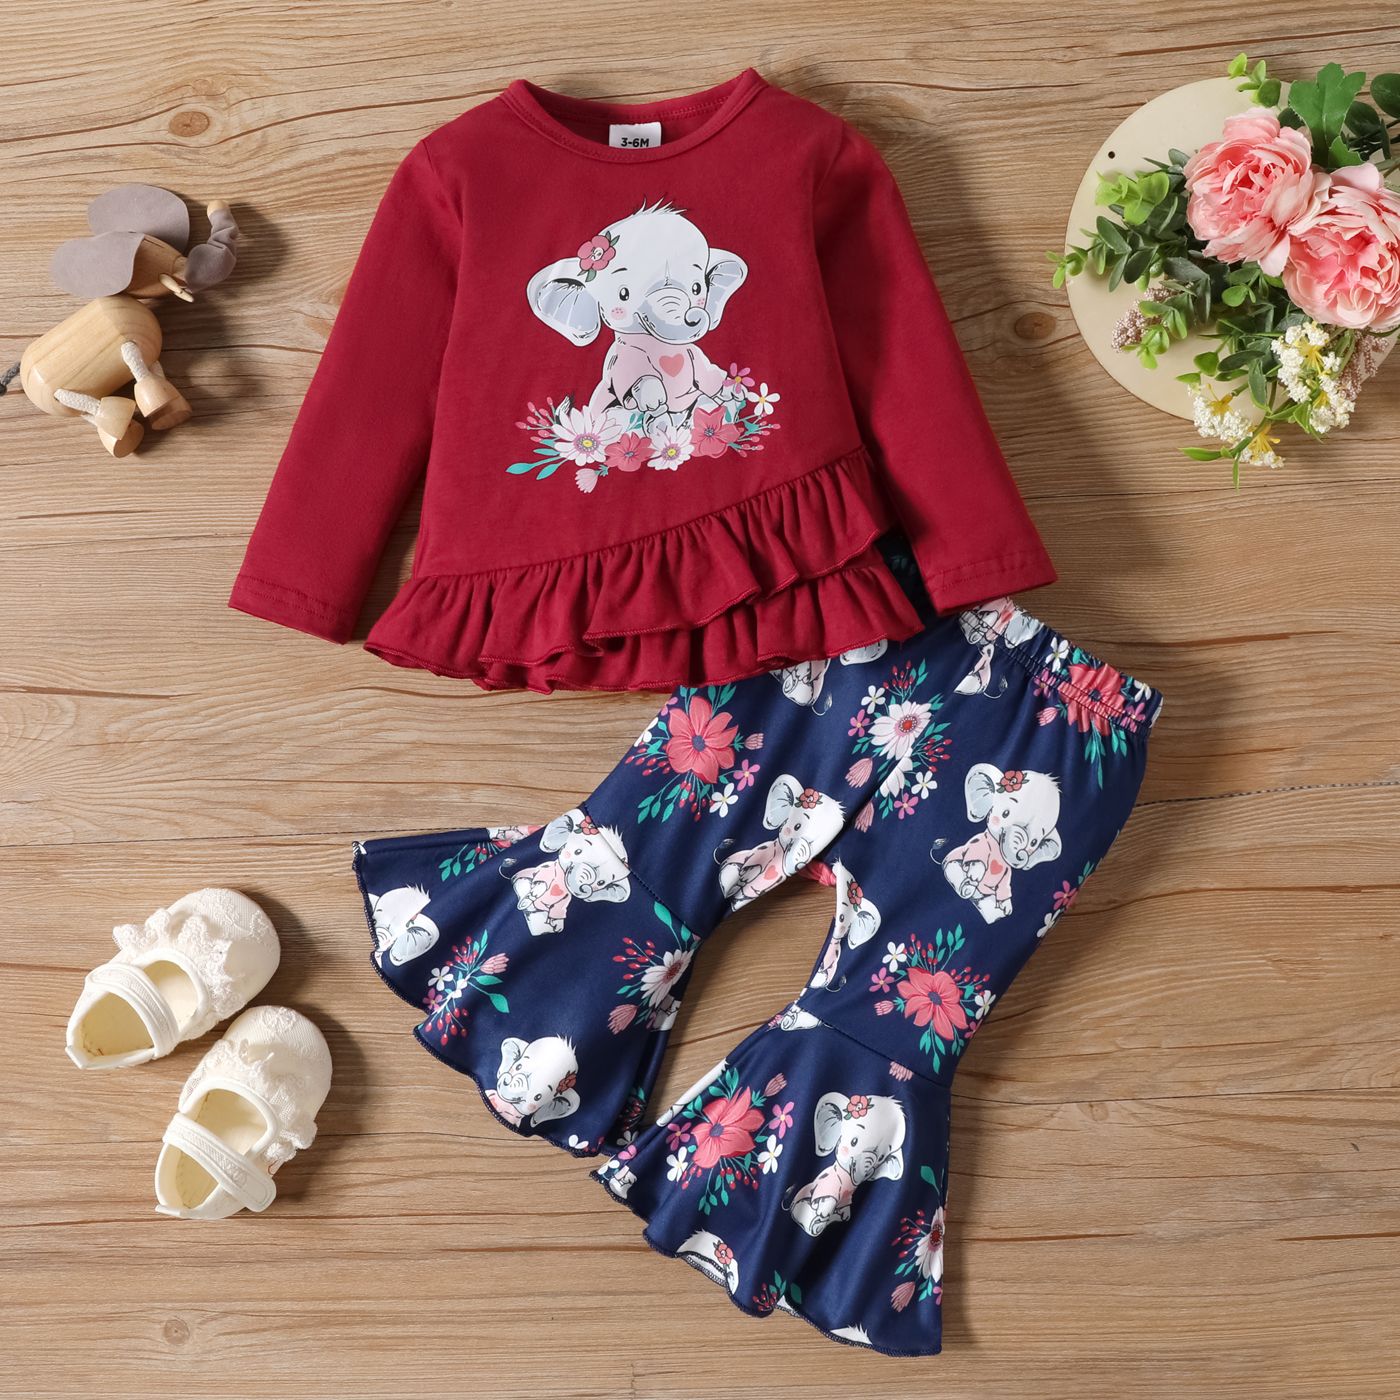 2pcs Baby Girl 95% Cotton Elephant Print Ruffle Long-sleeve Top and Allover Floral & Elephant Print 